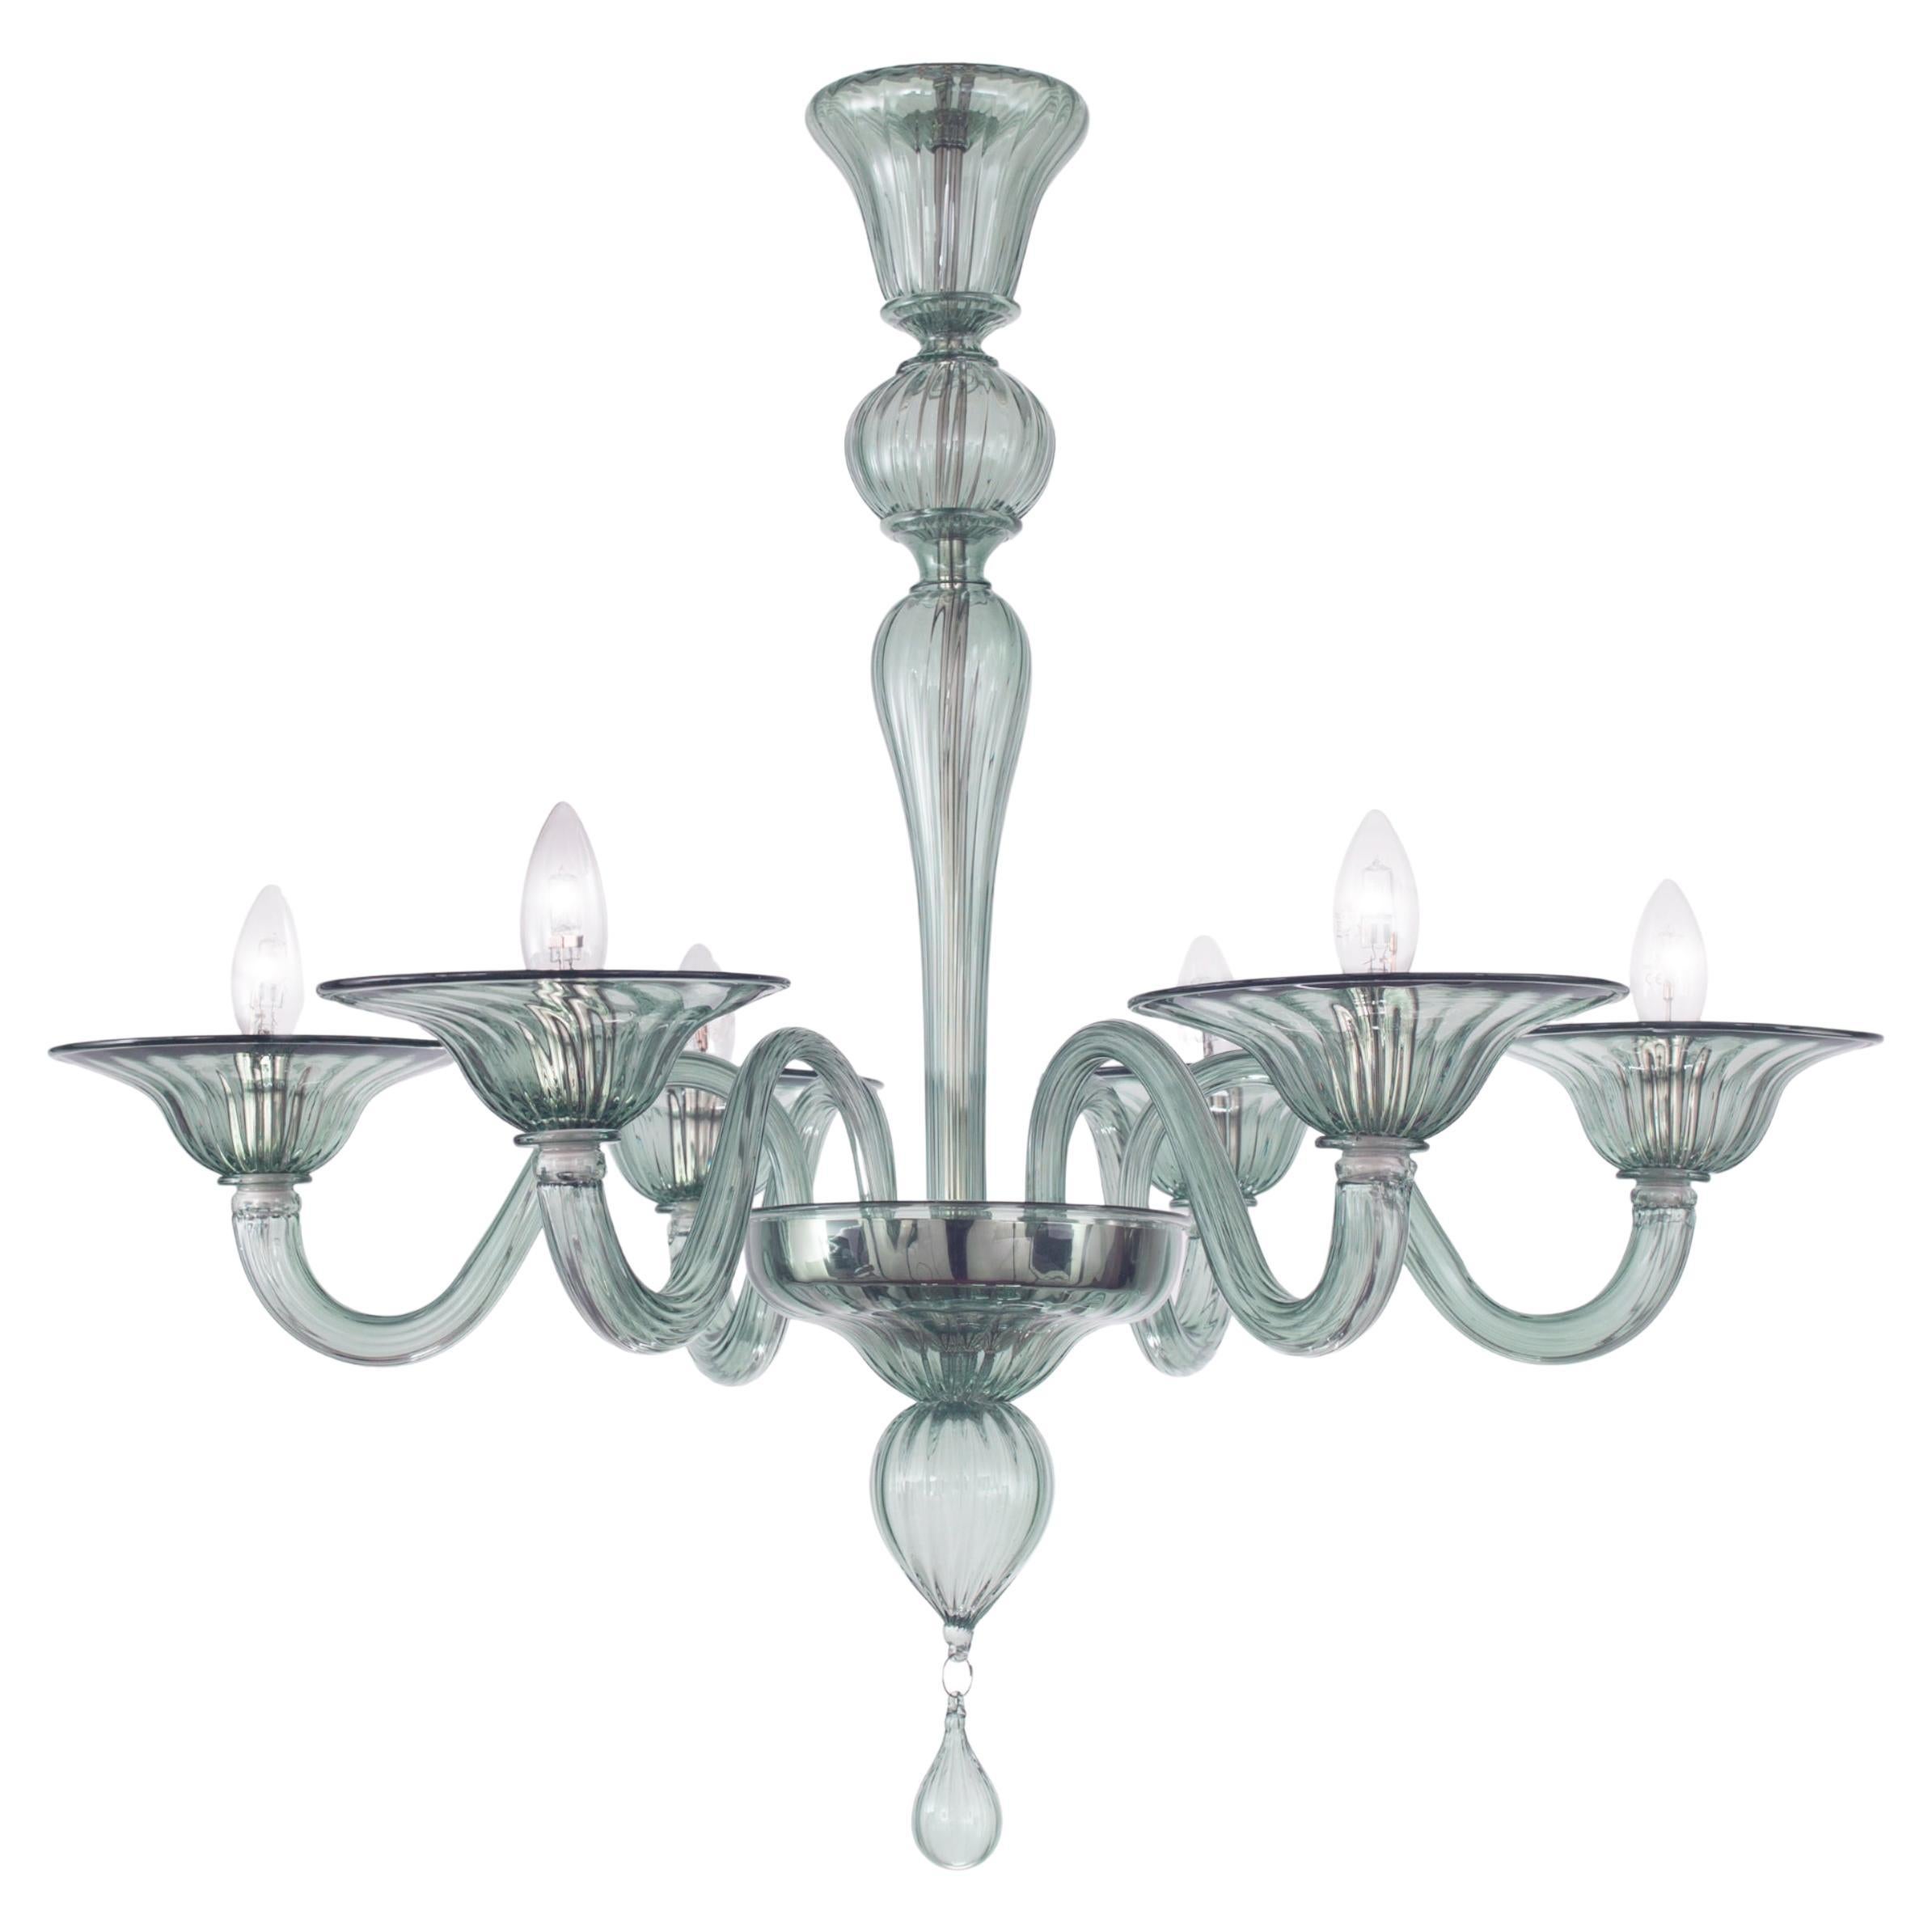 Simplicissimus Chandelier, 6 Arms grey green Murano Glass by Multiforme